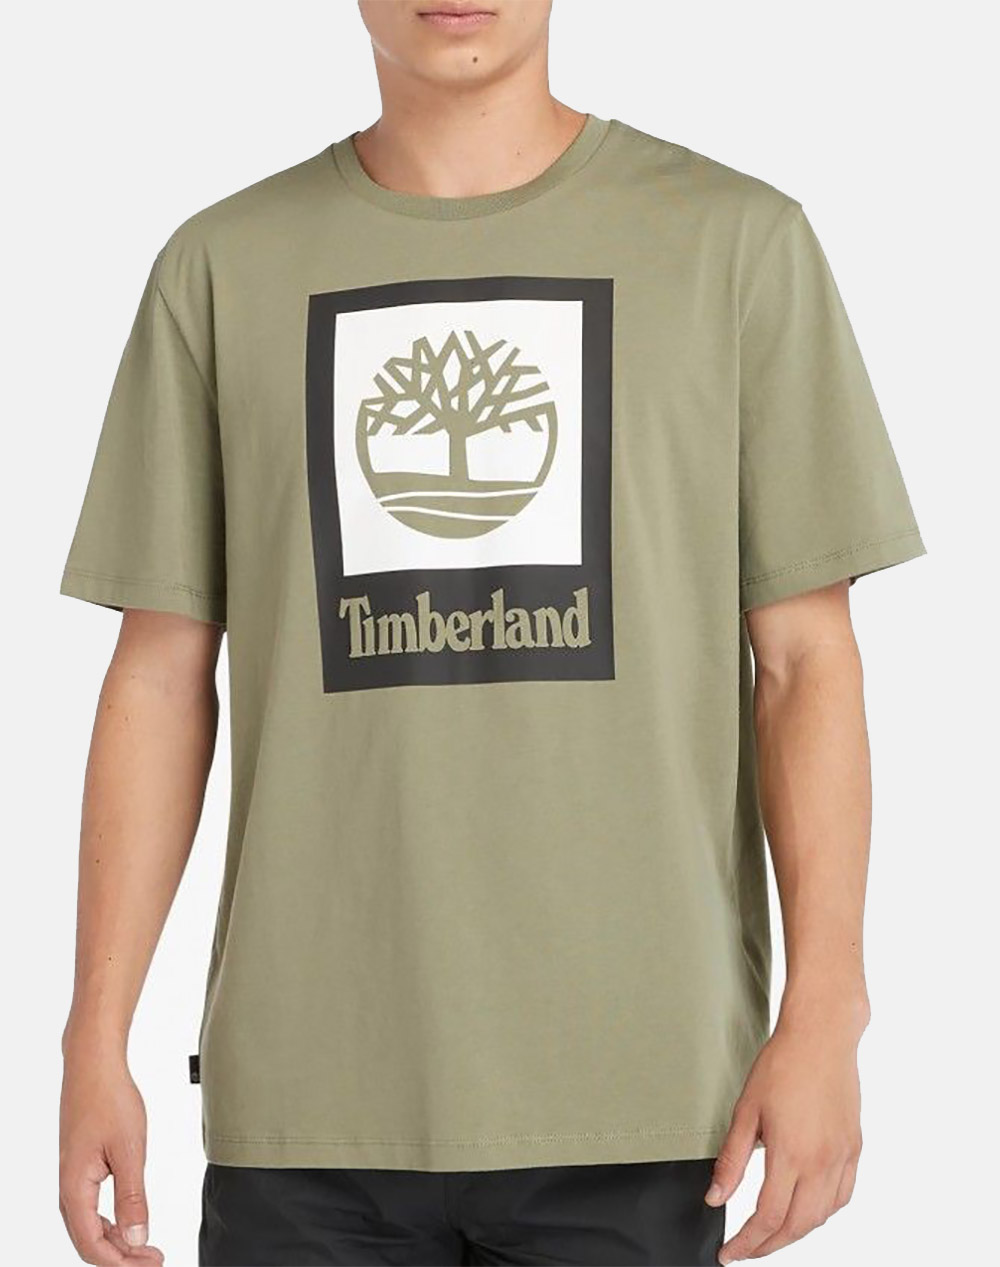 TIMBERLAND STLG Colored Short Sleeve Te TB0A5QS2-590 Olive